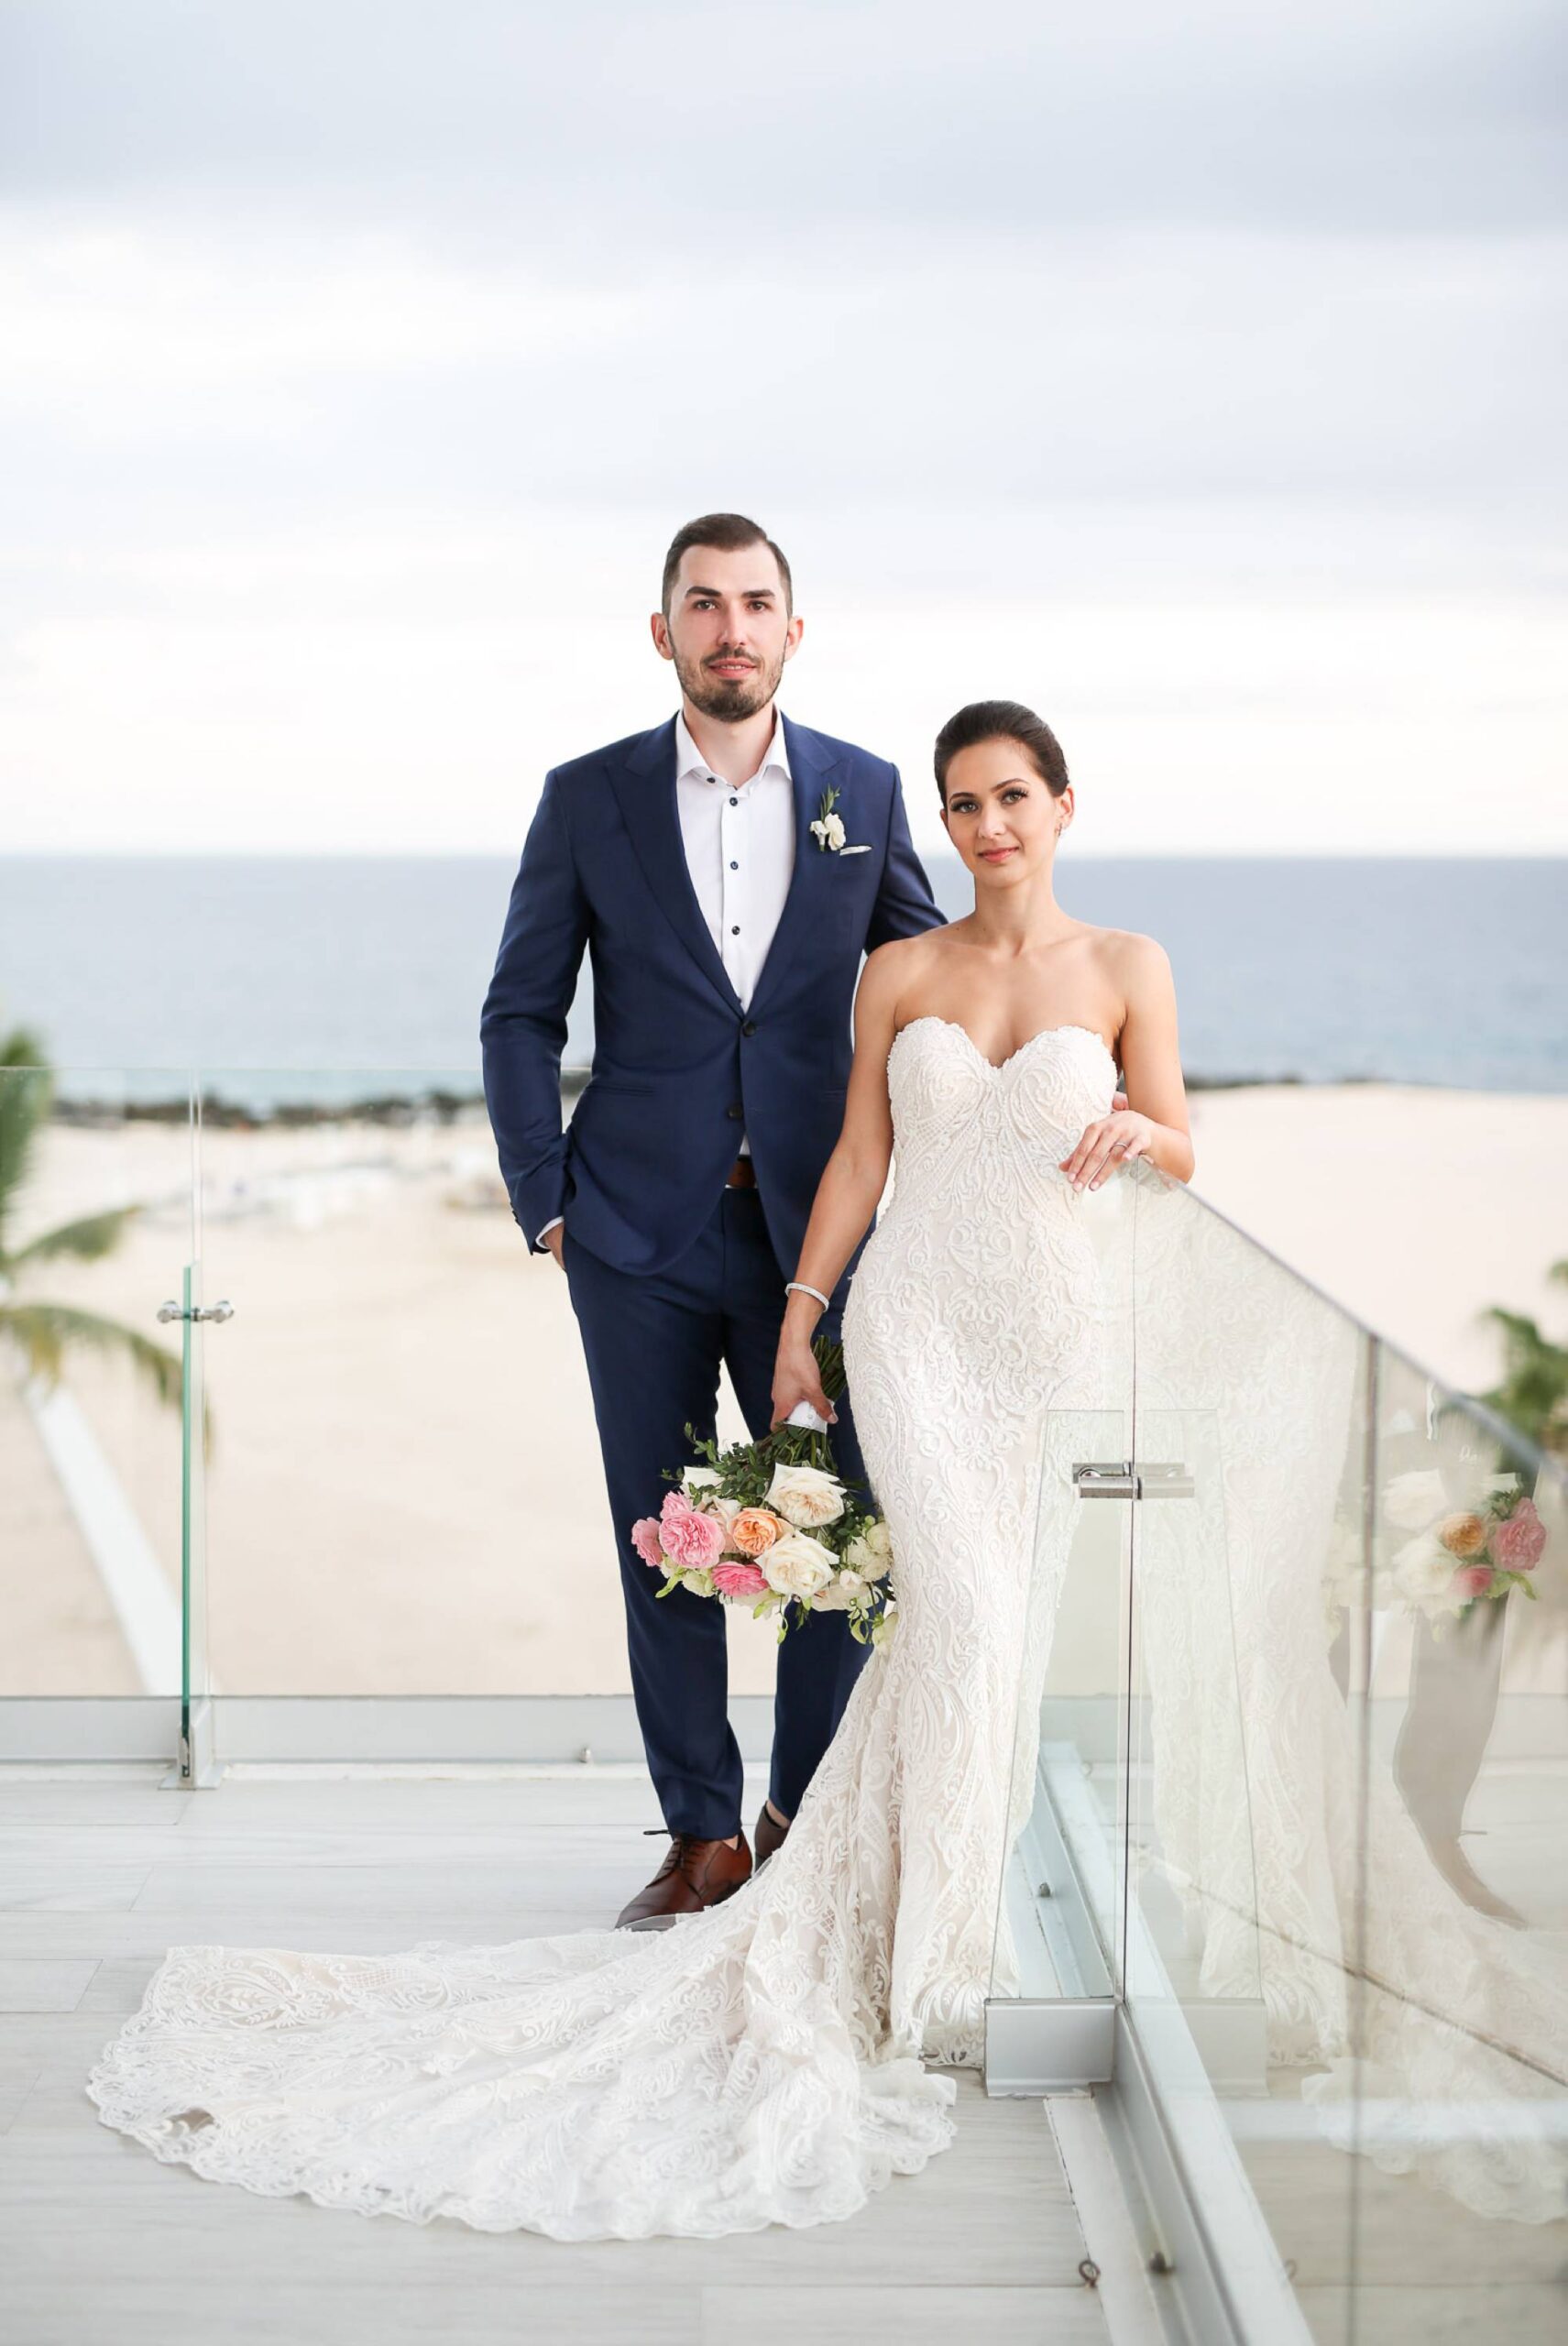 Bride and groom portrait on reception balcony with glass railings and beach and ocean behind